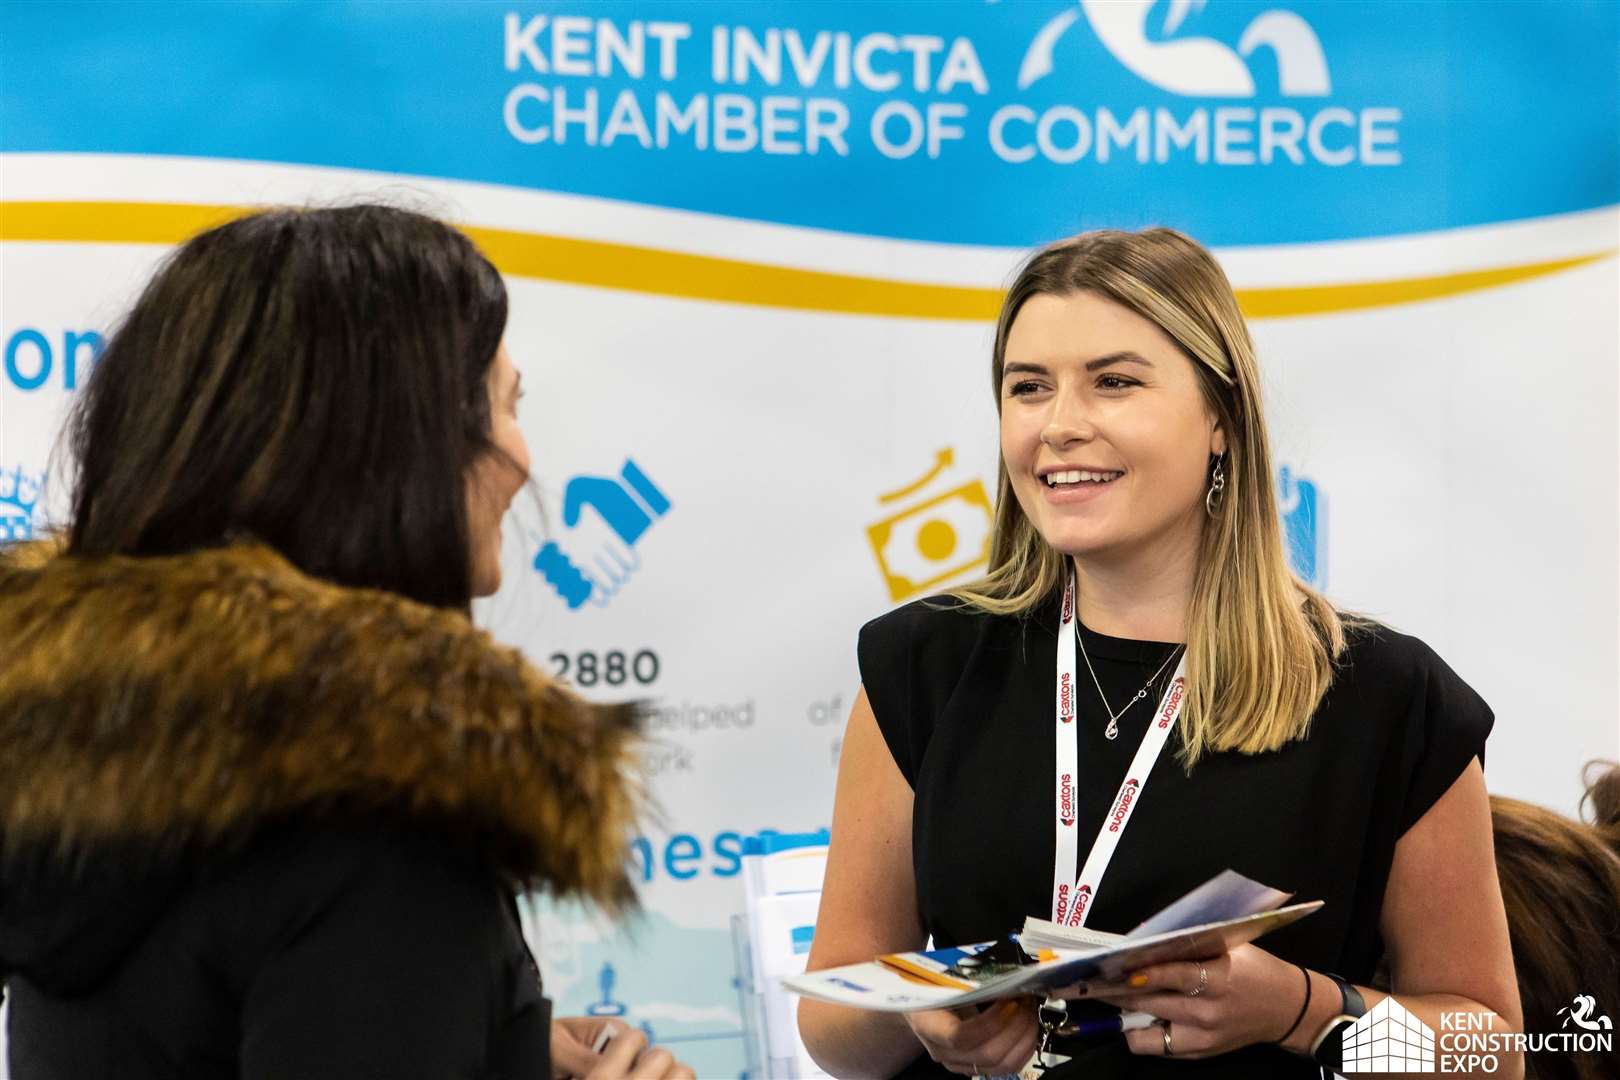 The Kent Construction Expo 2021 was held at the Kent Event Centre